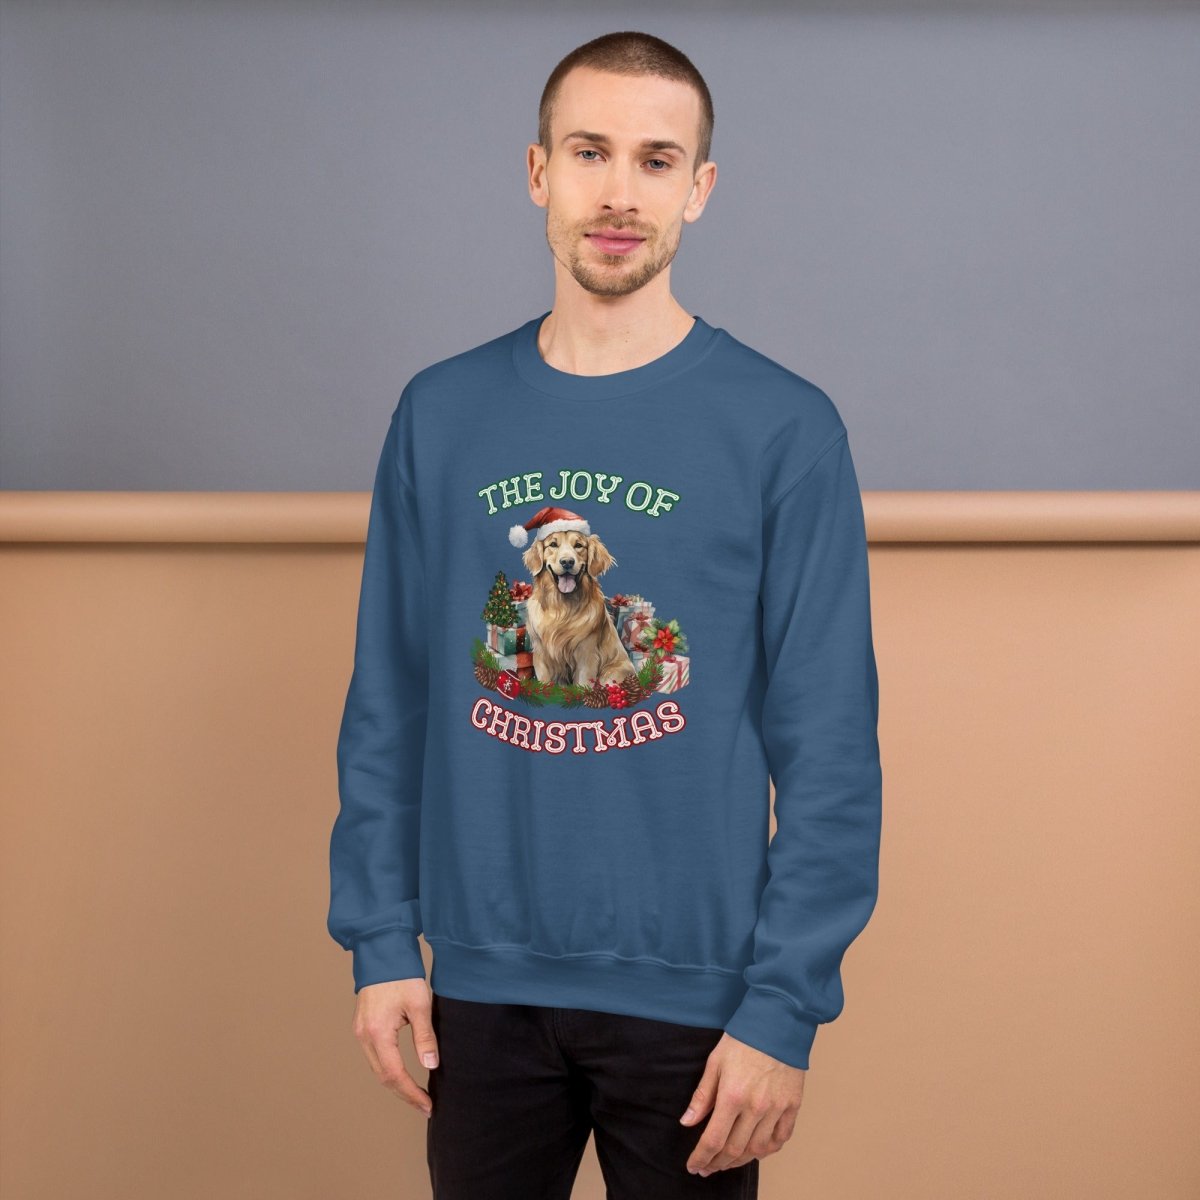 Christmas Golden Retriever Pullover - High Quality Festive Unisex Sweater, Gift for Golden Retriever Owner, Gift for Doglovers, Cute Xmas Dog - Everything Pixel